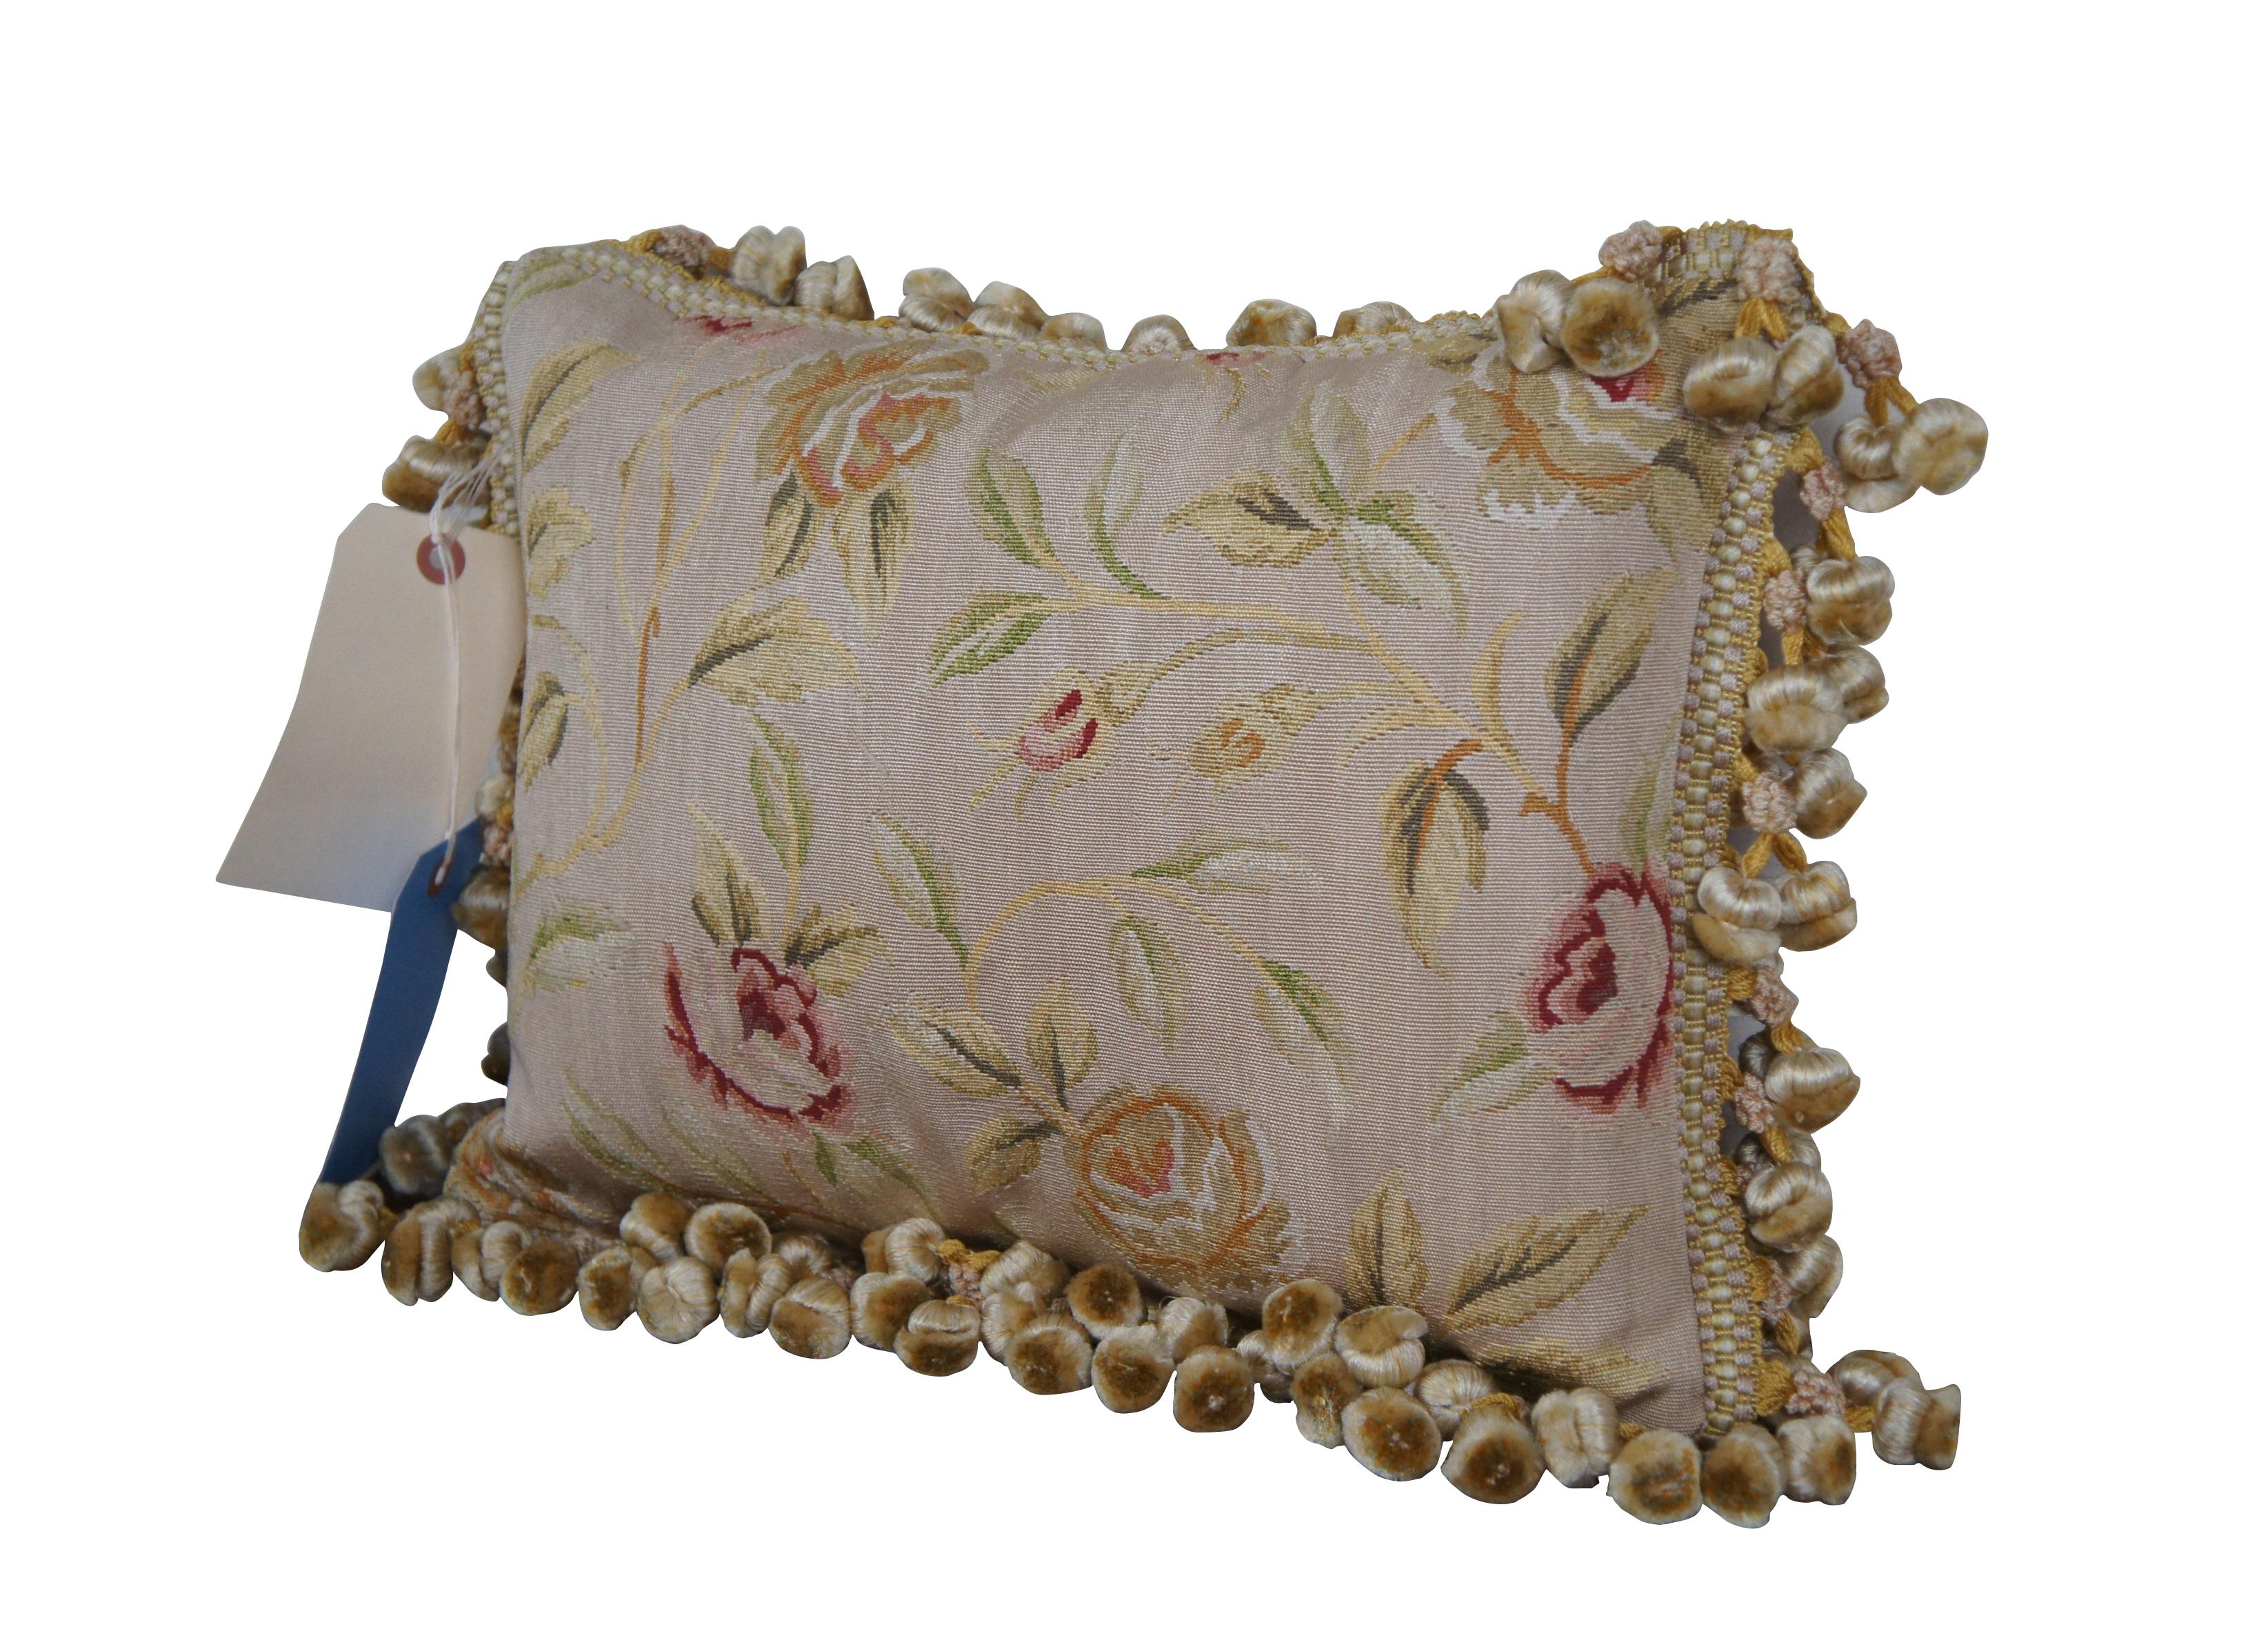 2 Available - 20th century square throw pillow, embroidered in silk with leafy stems of large yellow and pink roses. Cream and gold ball tassel trim. Light brown velour back with zipper closure.

Dimensions:
12